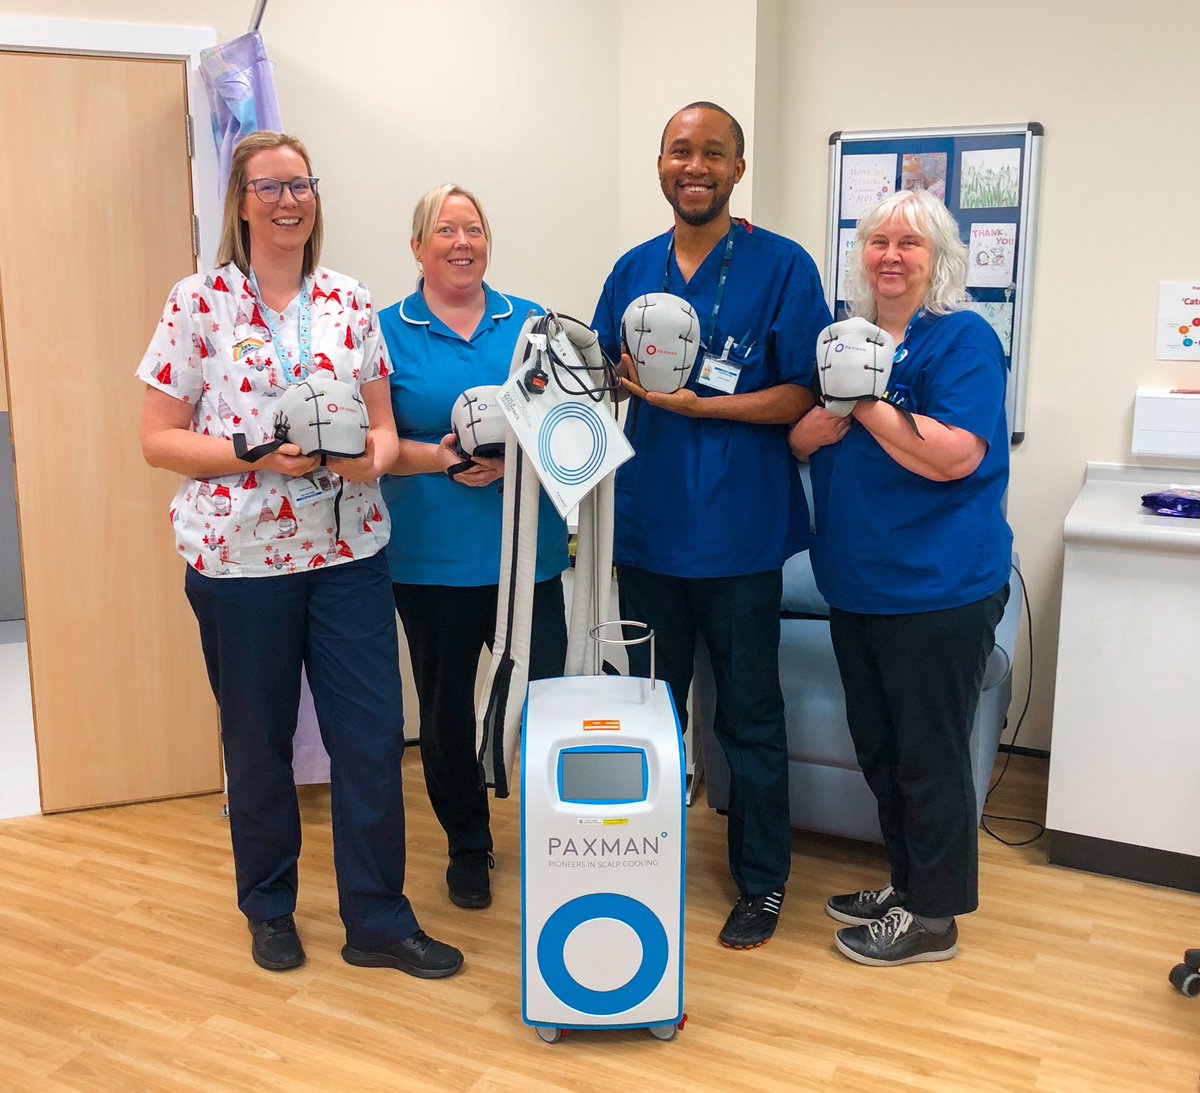 Amazing effort by all the new starters at County Hospital @UHNM_NHS this morning - i was chuffed to bits by your enthusiasm! They are ready to educate patients about @scalpcooling and all the benefits of cold cap treatment! ✌🏾💙 #changingthefaceofcancer